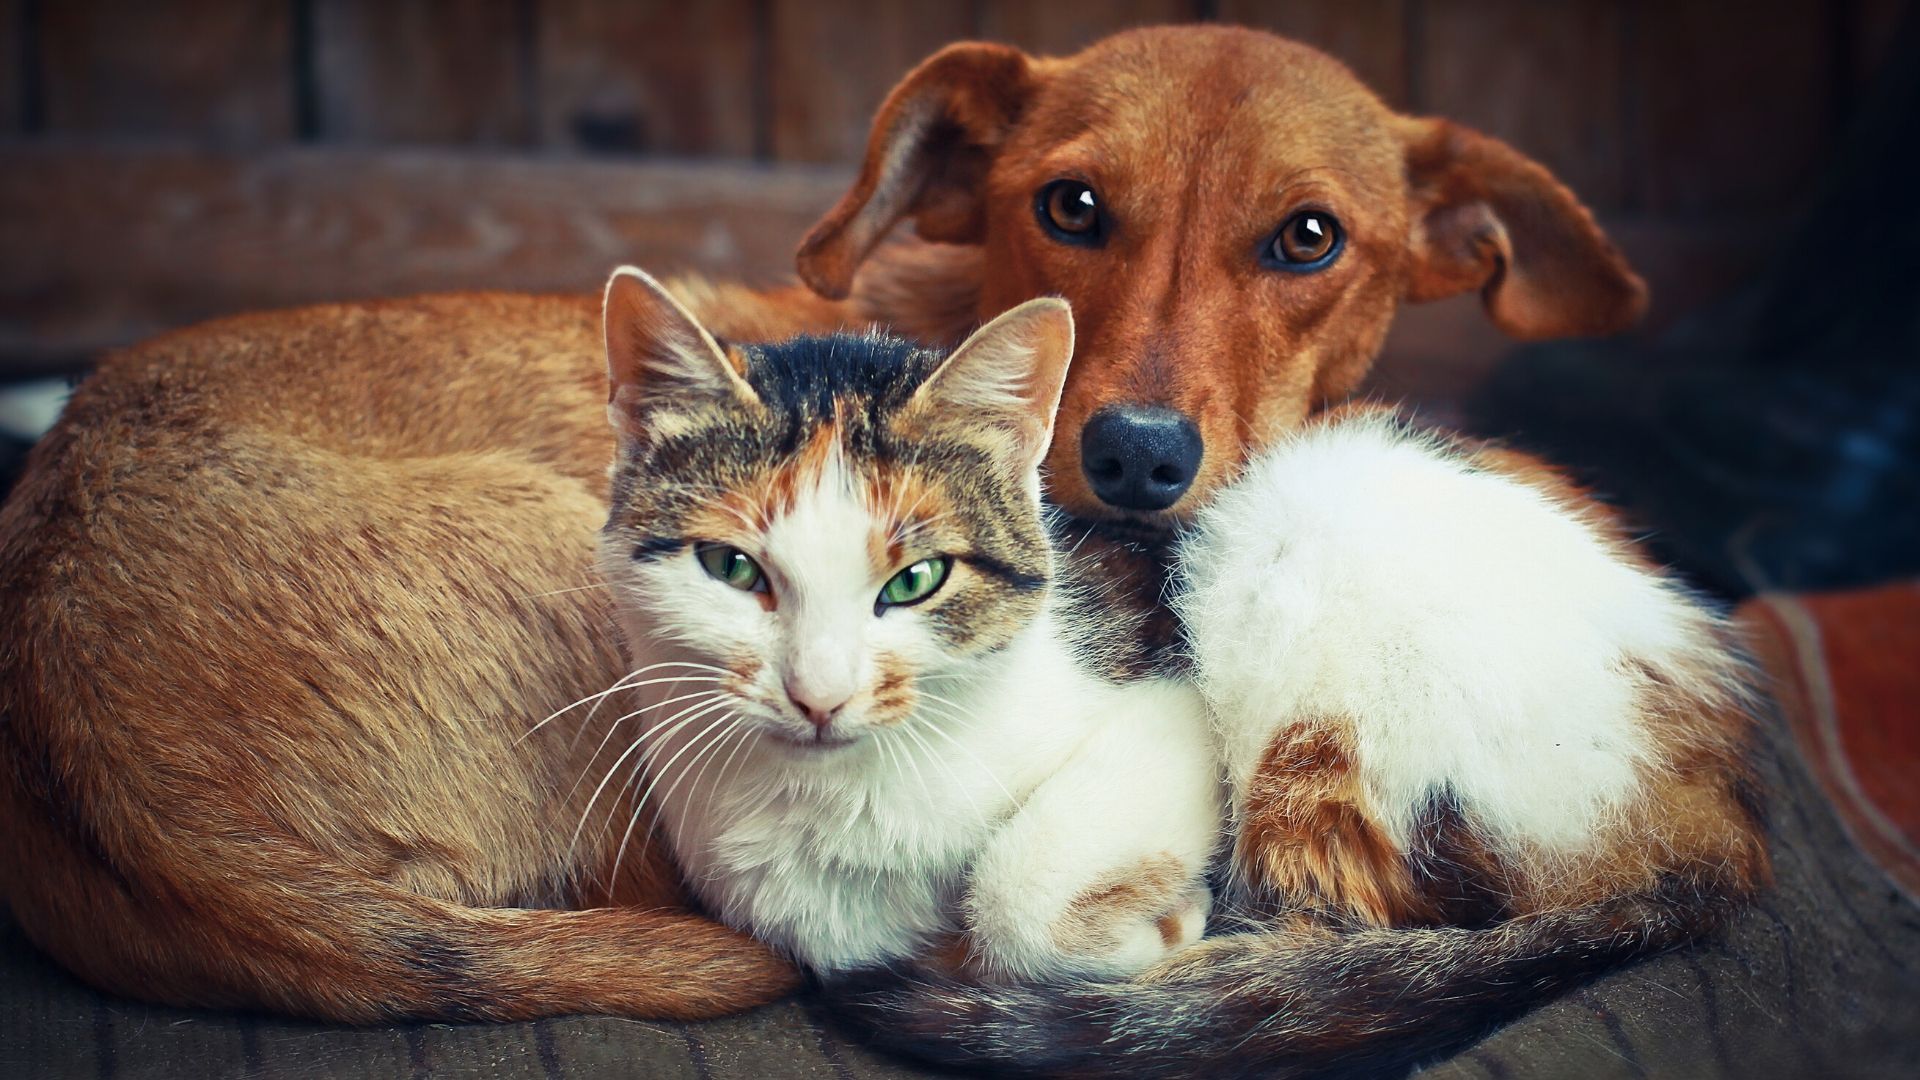 7 Incredible Benefits of Owning a Pet